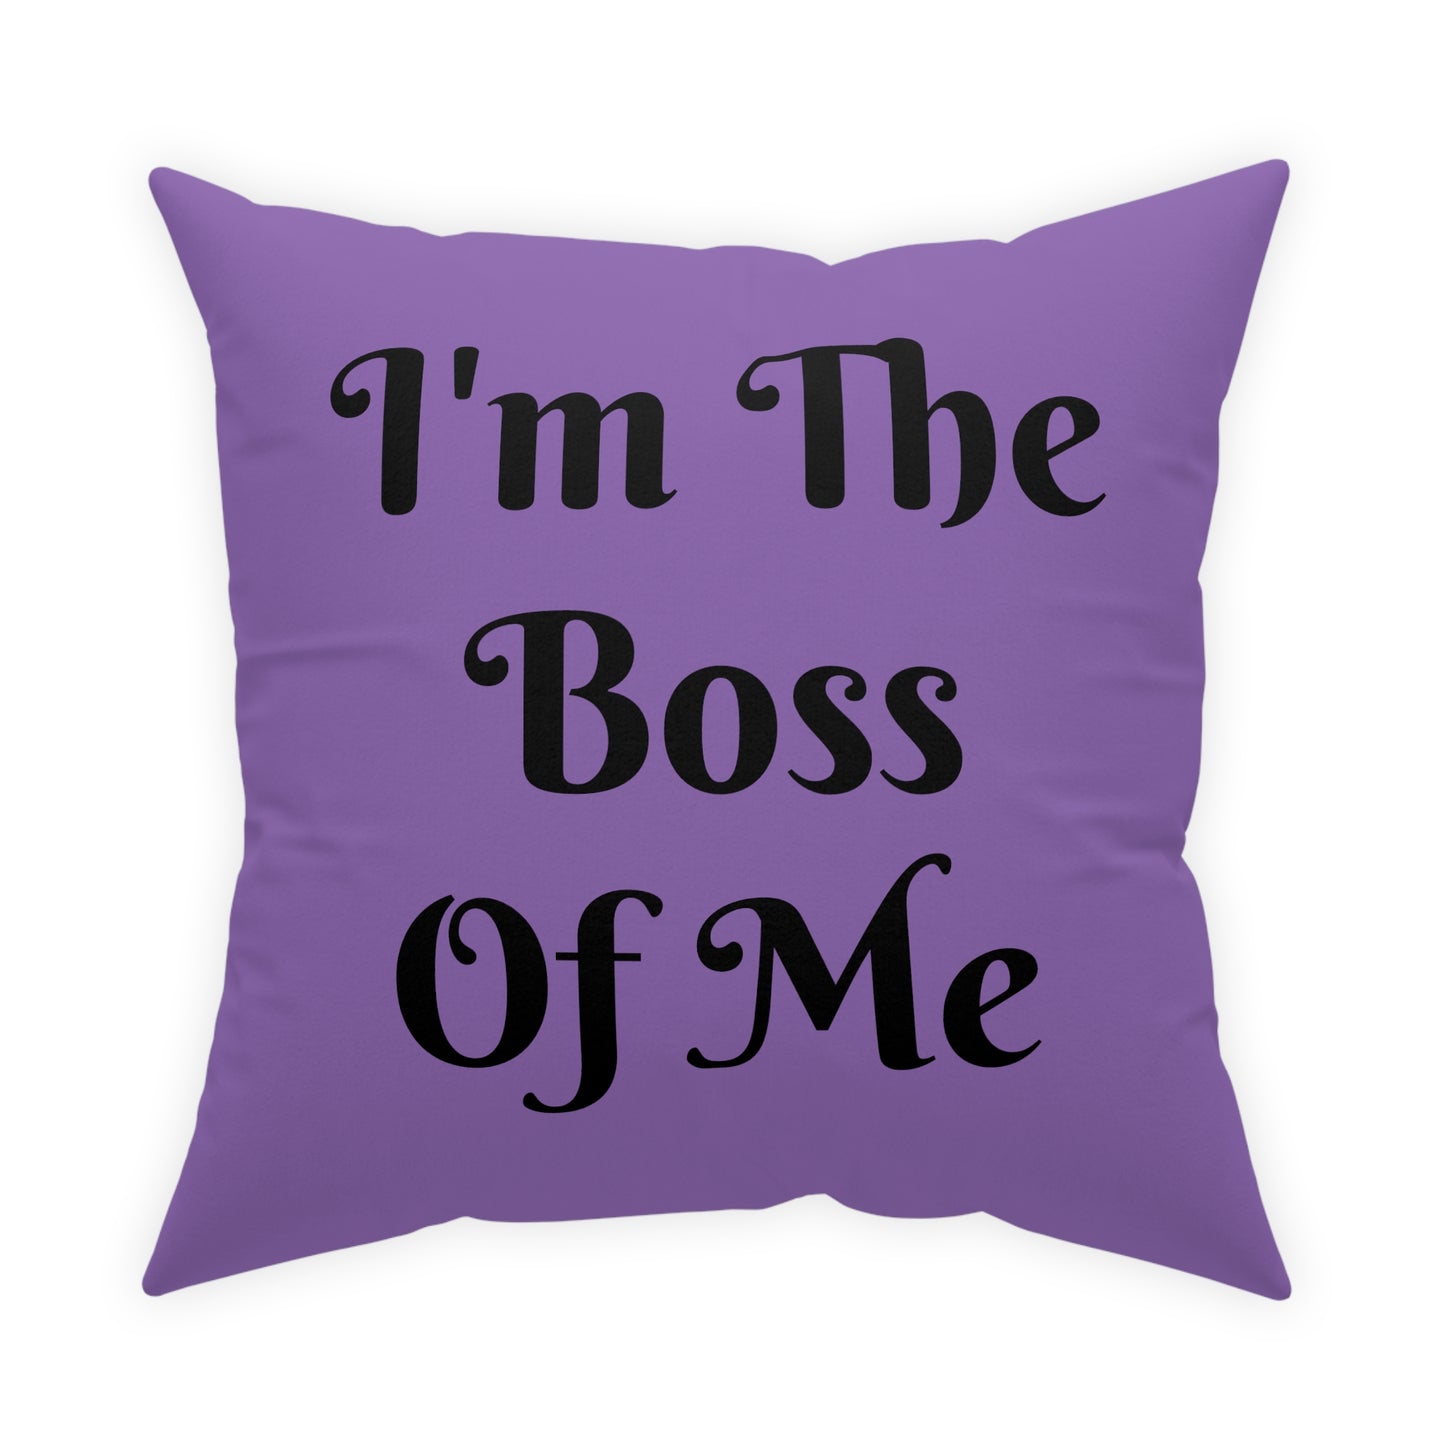 The Original ITBOM BOSS Broadcloth Accent Pillows in Different Sizes & Colors - All Customizable